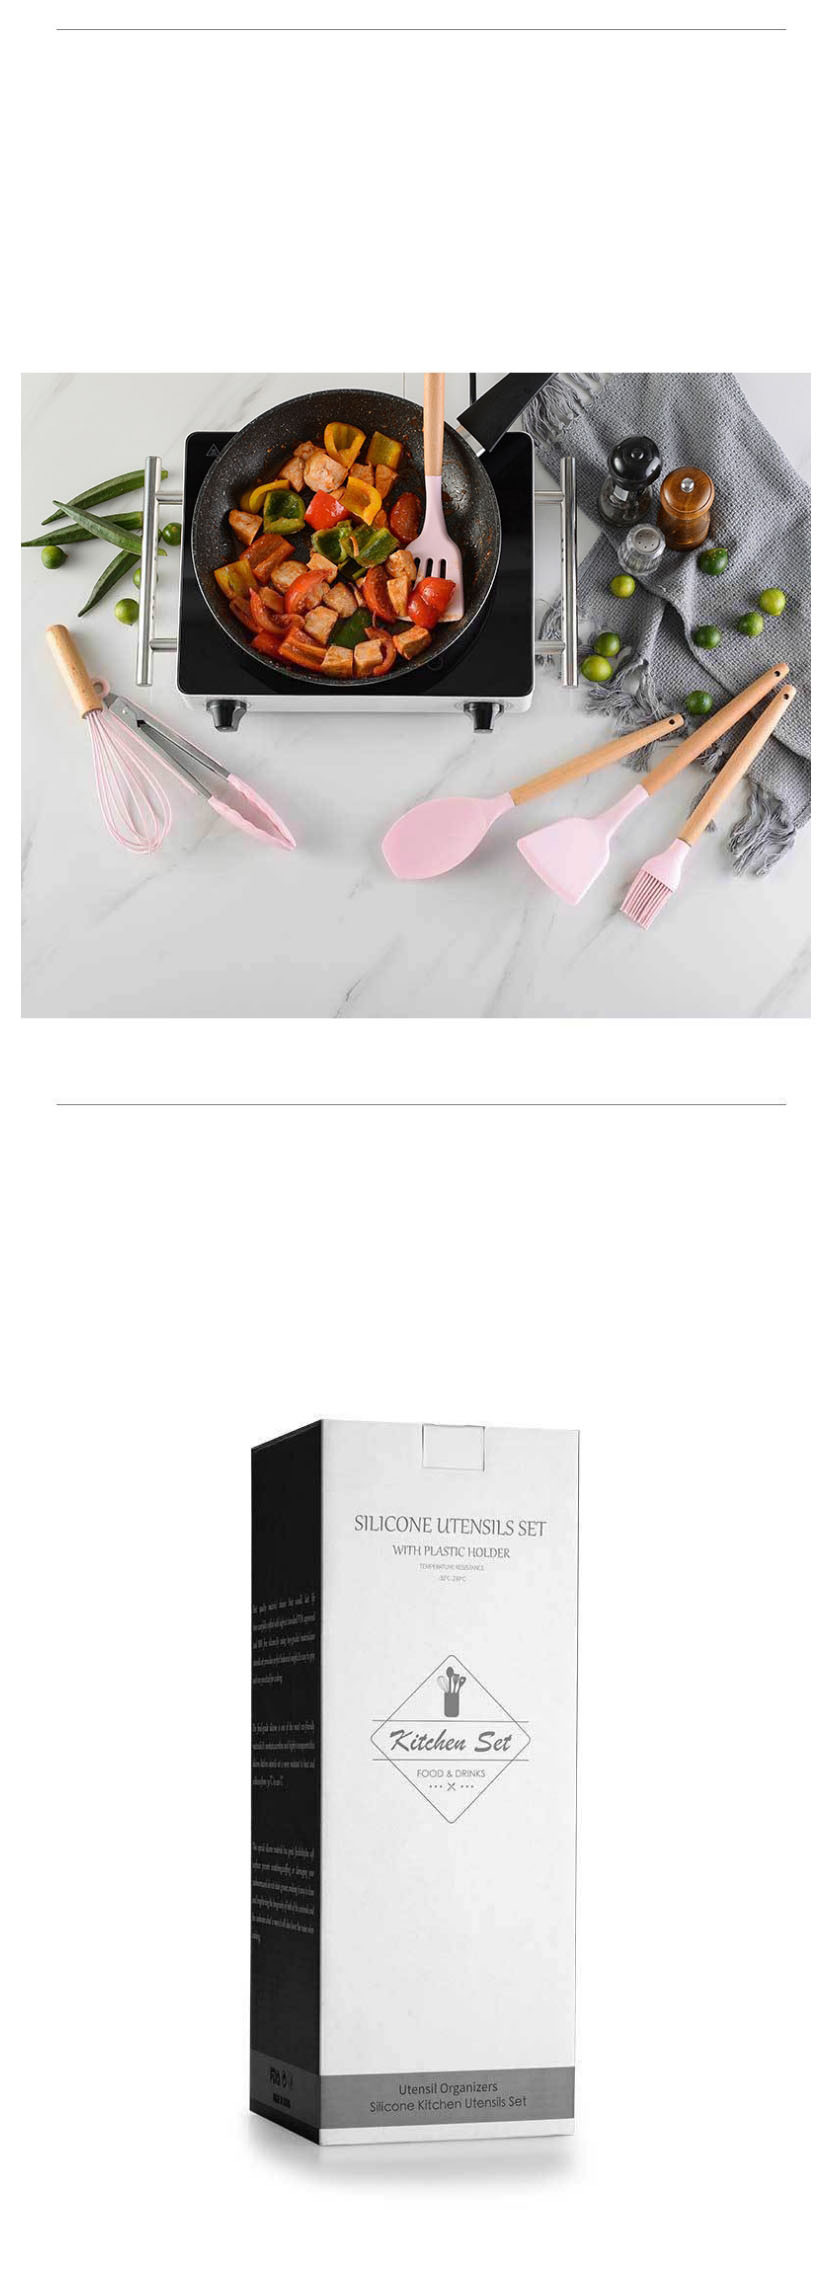 Fashion 11 Piece Set (excluding Bin) Pink Solid Wood Handle With Bucket And Silica Gel Kitchenware,Kitchen